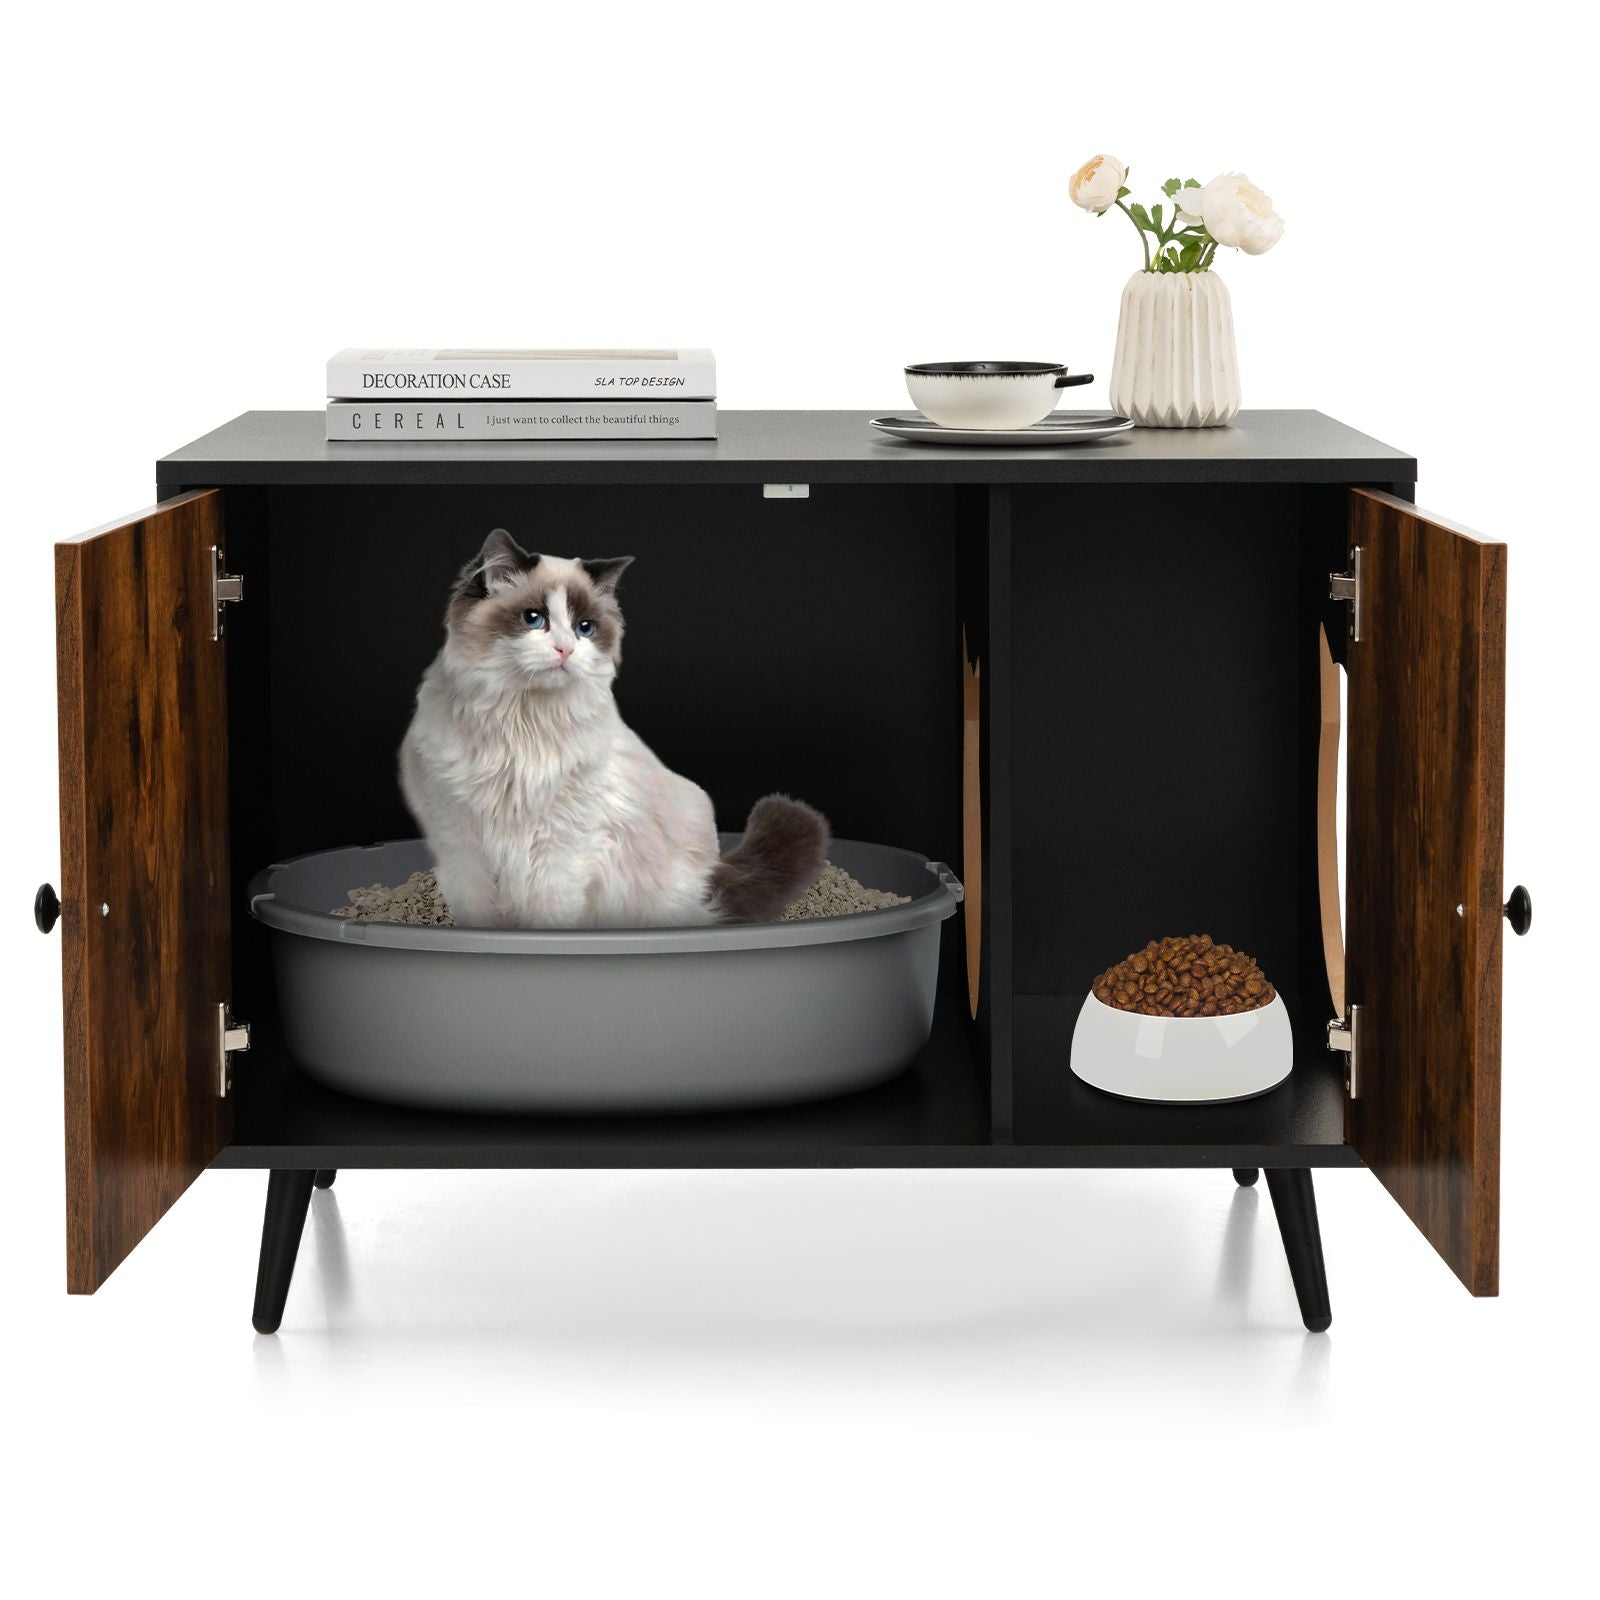 Modern Cat Litter Box Enclosure with Divider and 2 Cat Head-Shaped Entries